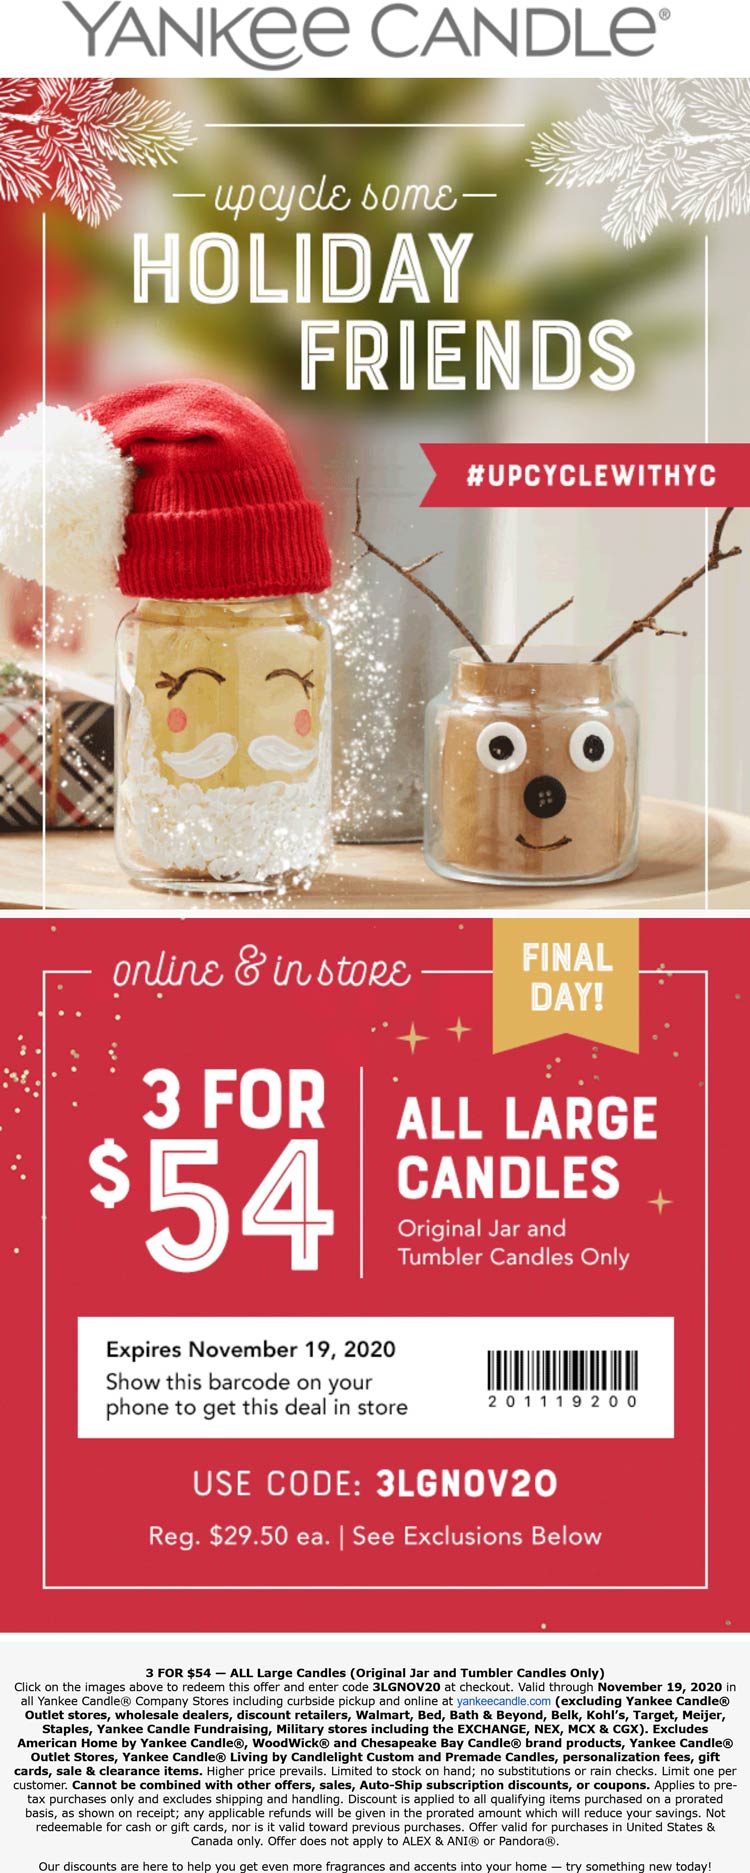 3 large candles for 54 today at Yankee Candle, or online via promo